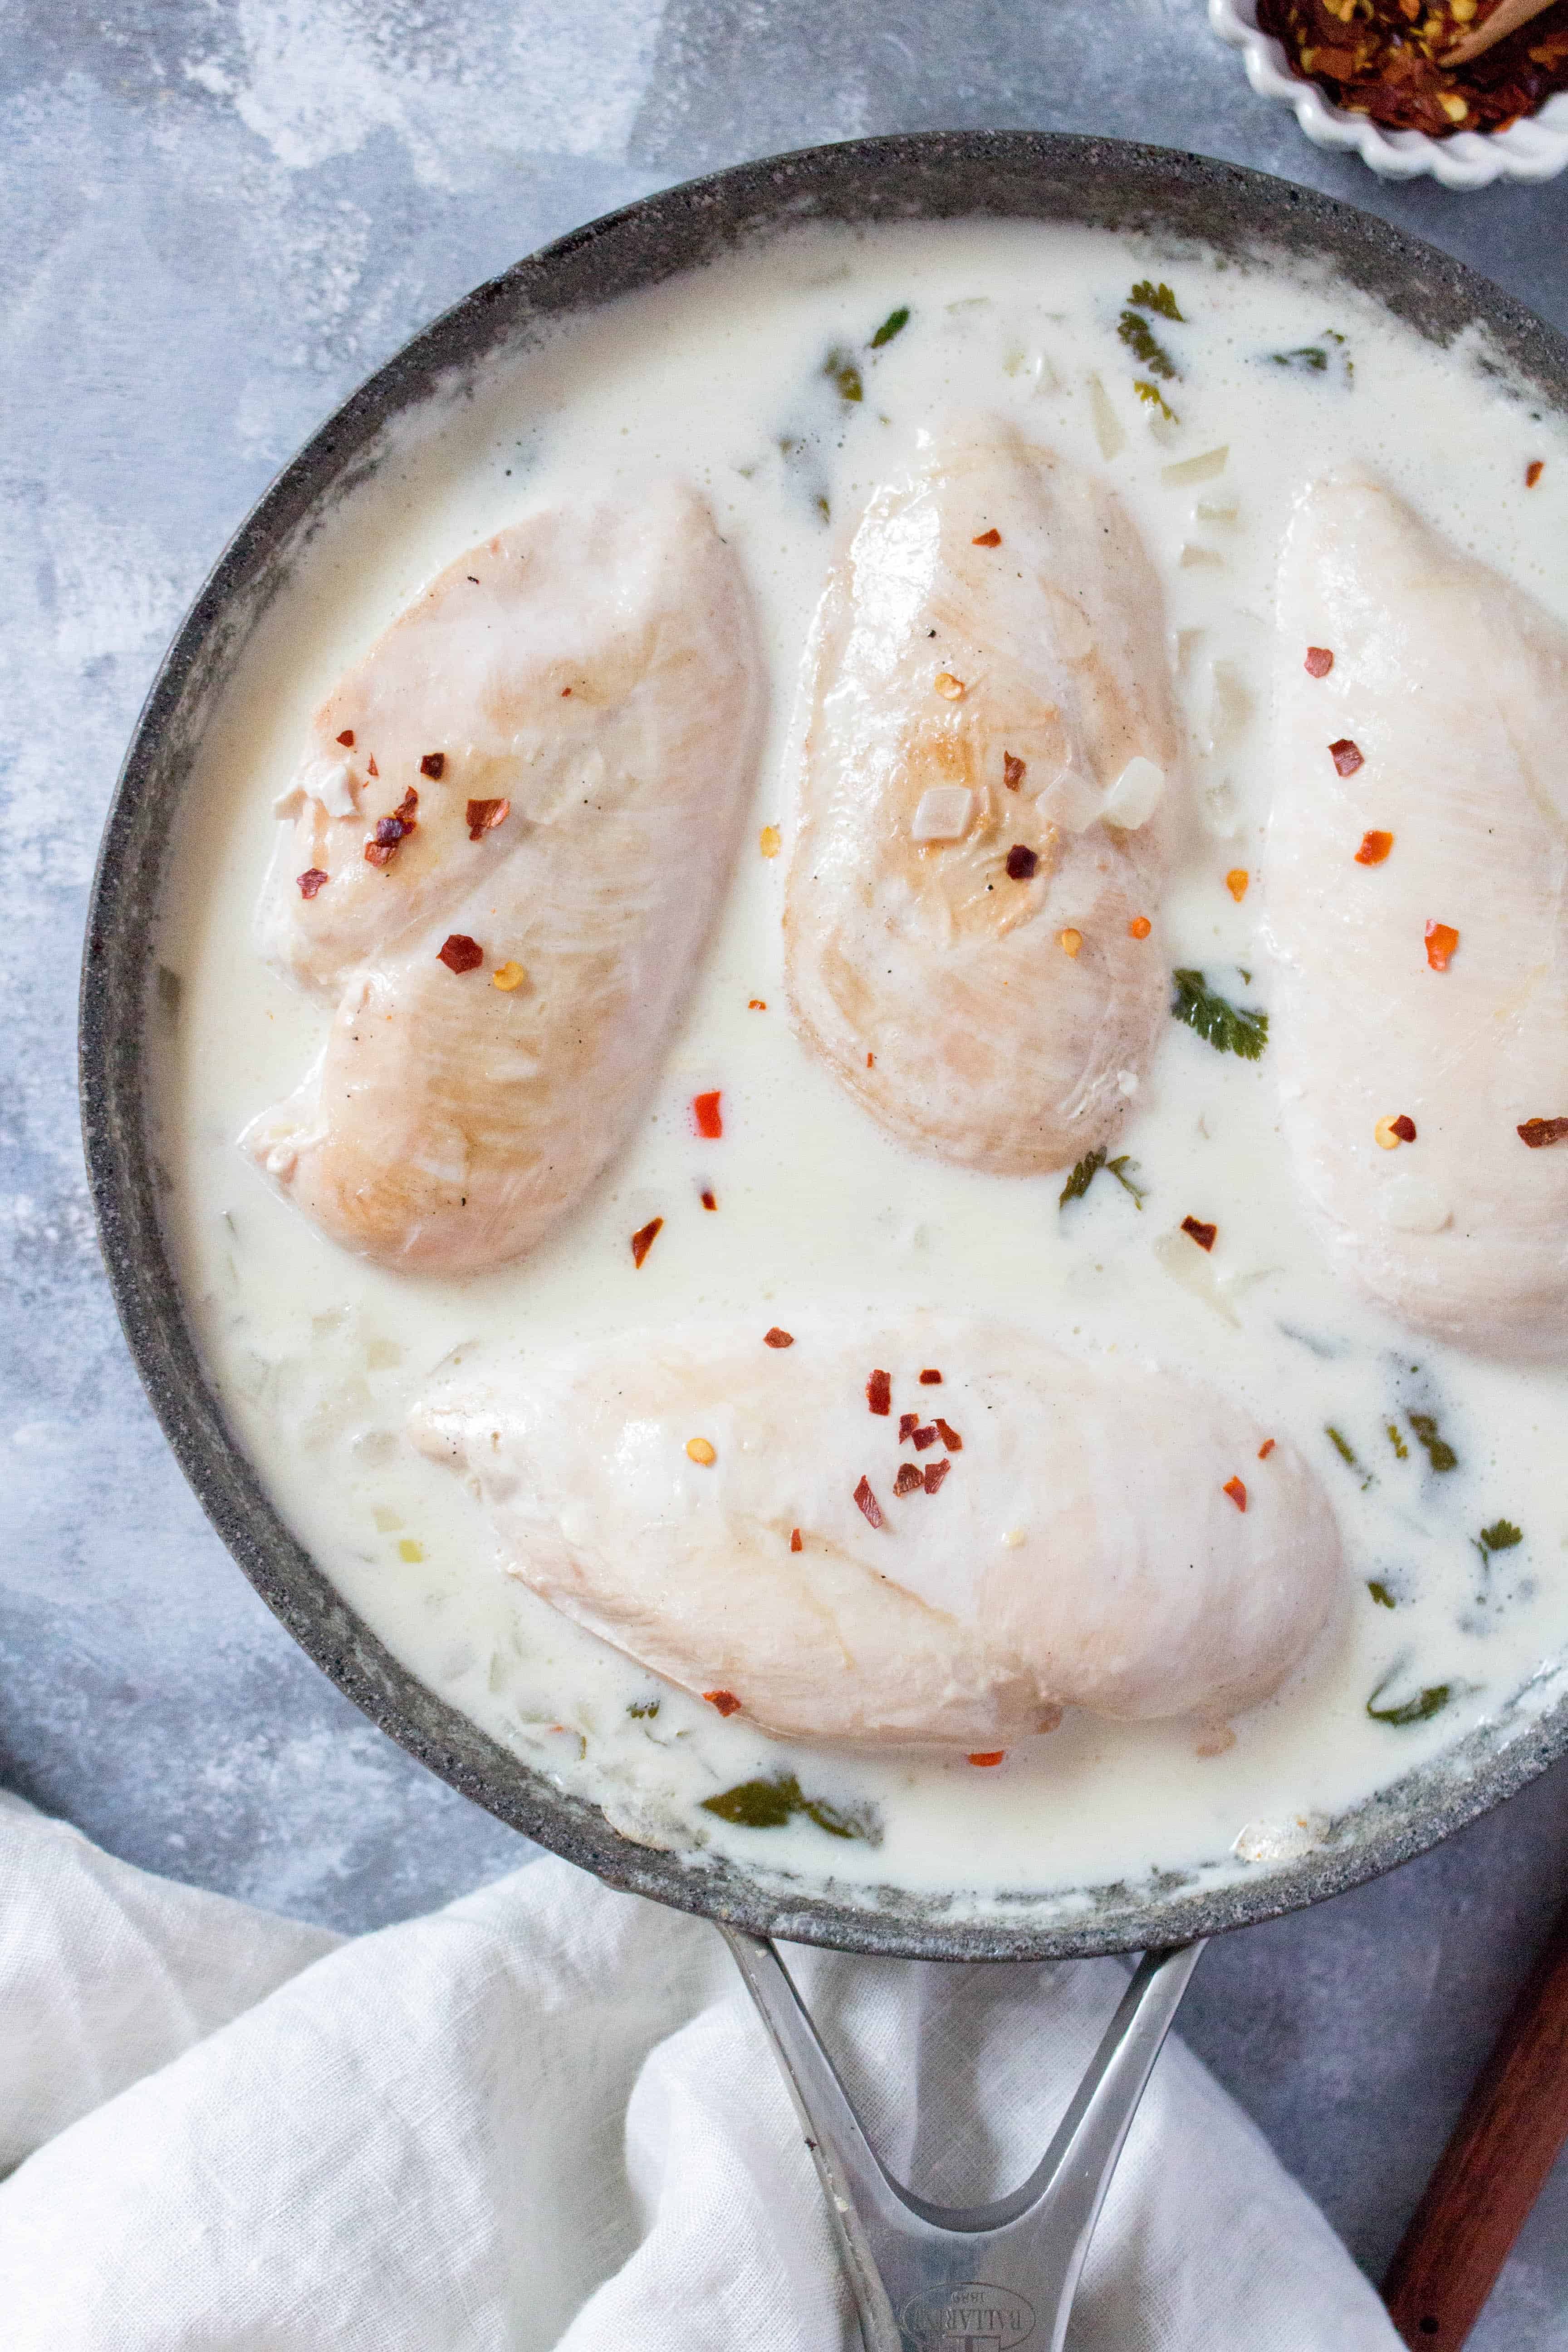 This Thai Inspired Chili Lime Coconut Chicken is a creamy, refreshing, and packed with flavour recipe that is perfect as a meal prep or a quick weeknight dinner.